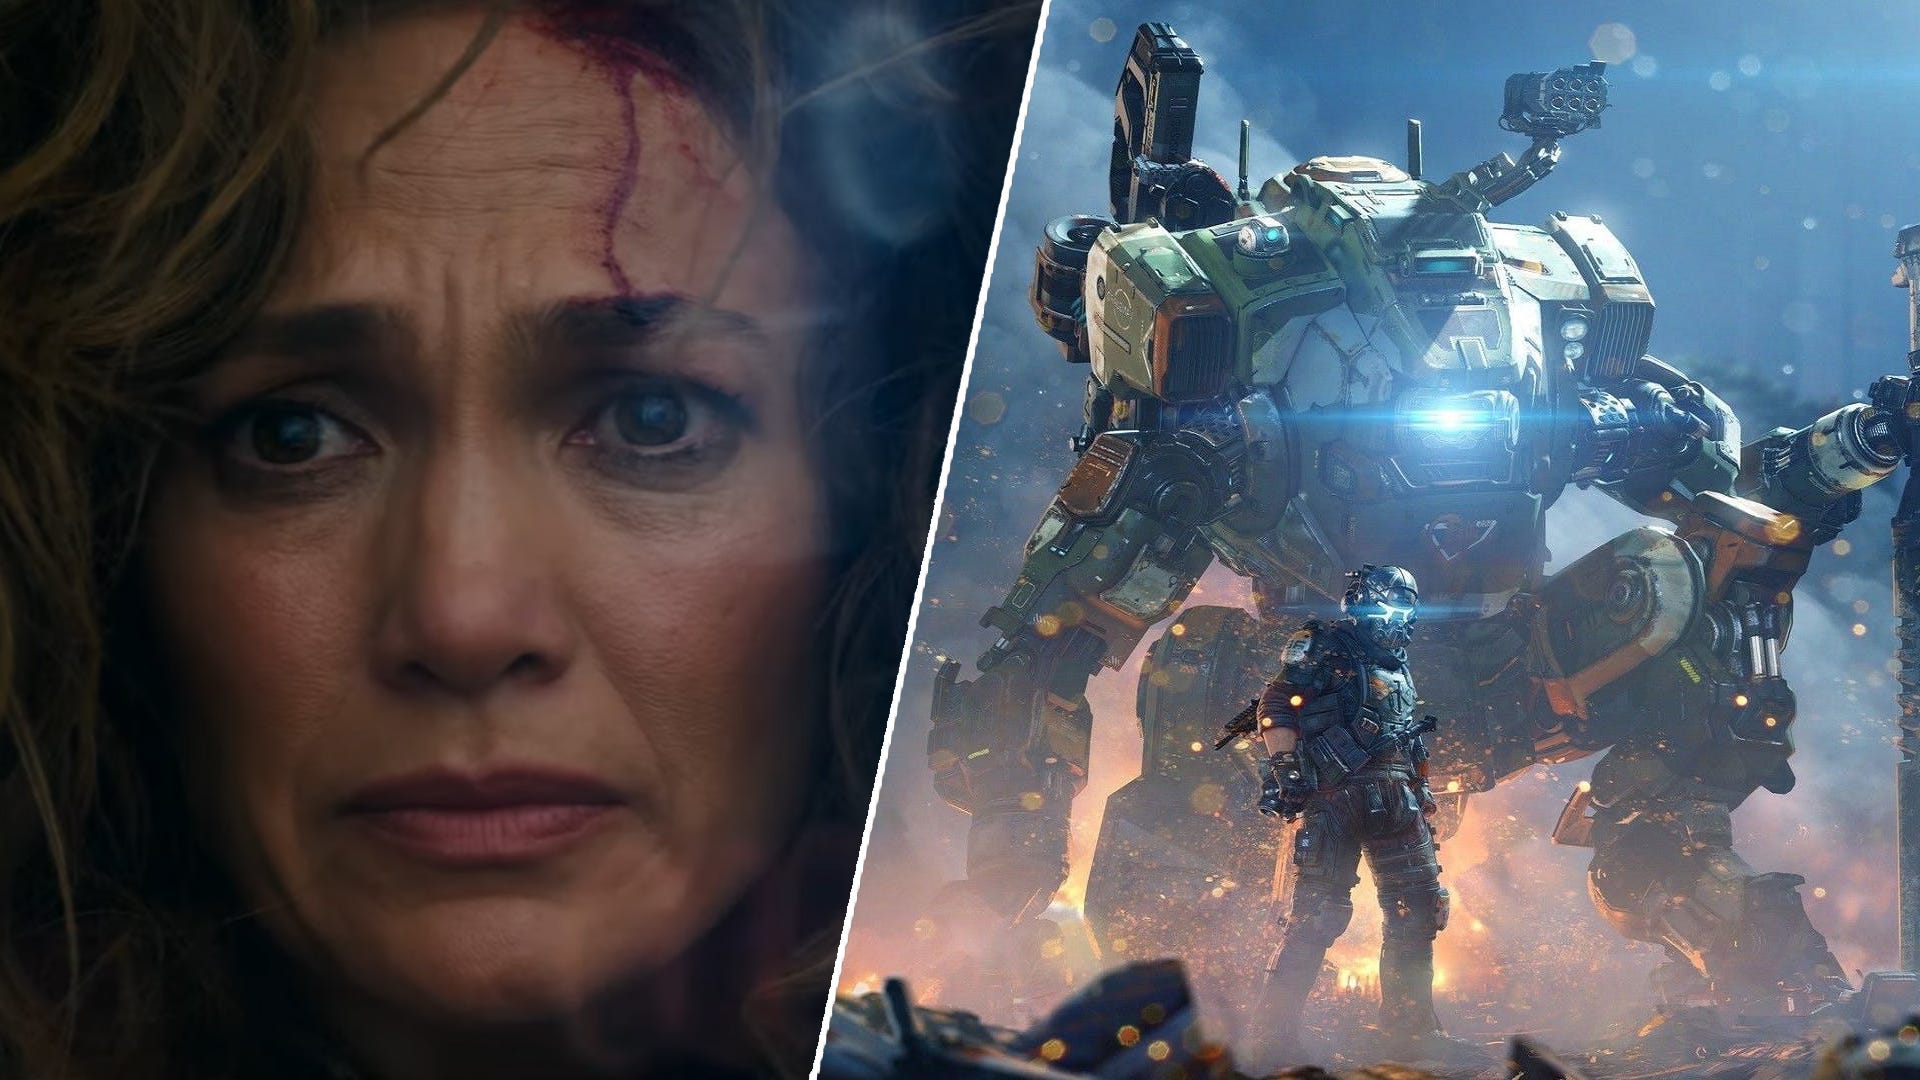 Jennifer Lopezs new Netflix film almost looks like a Titanfall movie if you squint hard enough